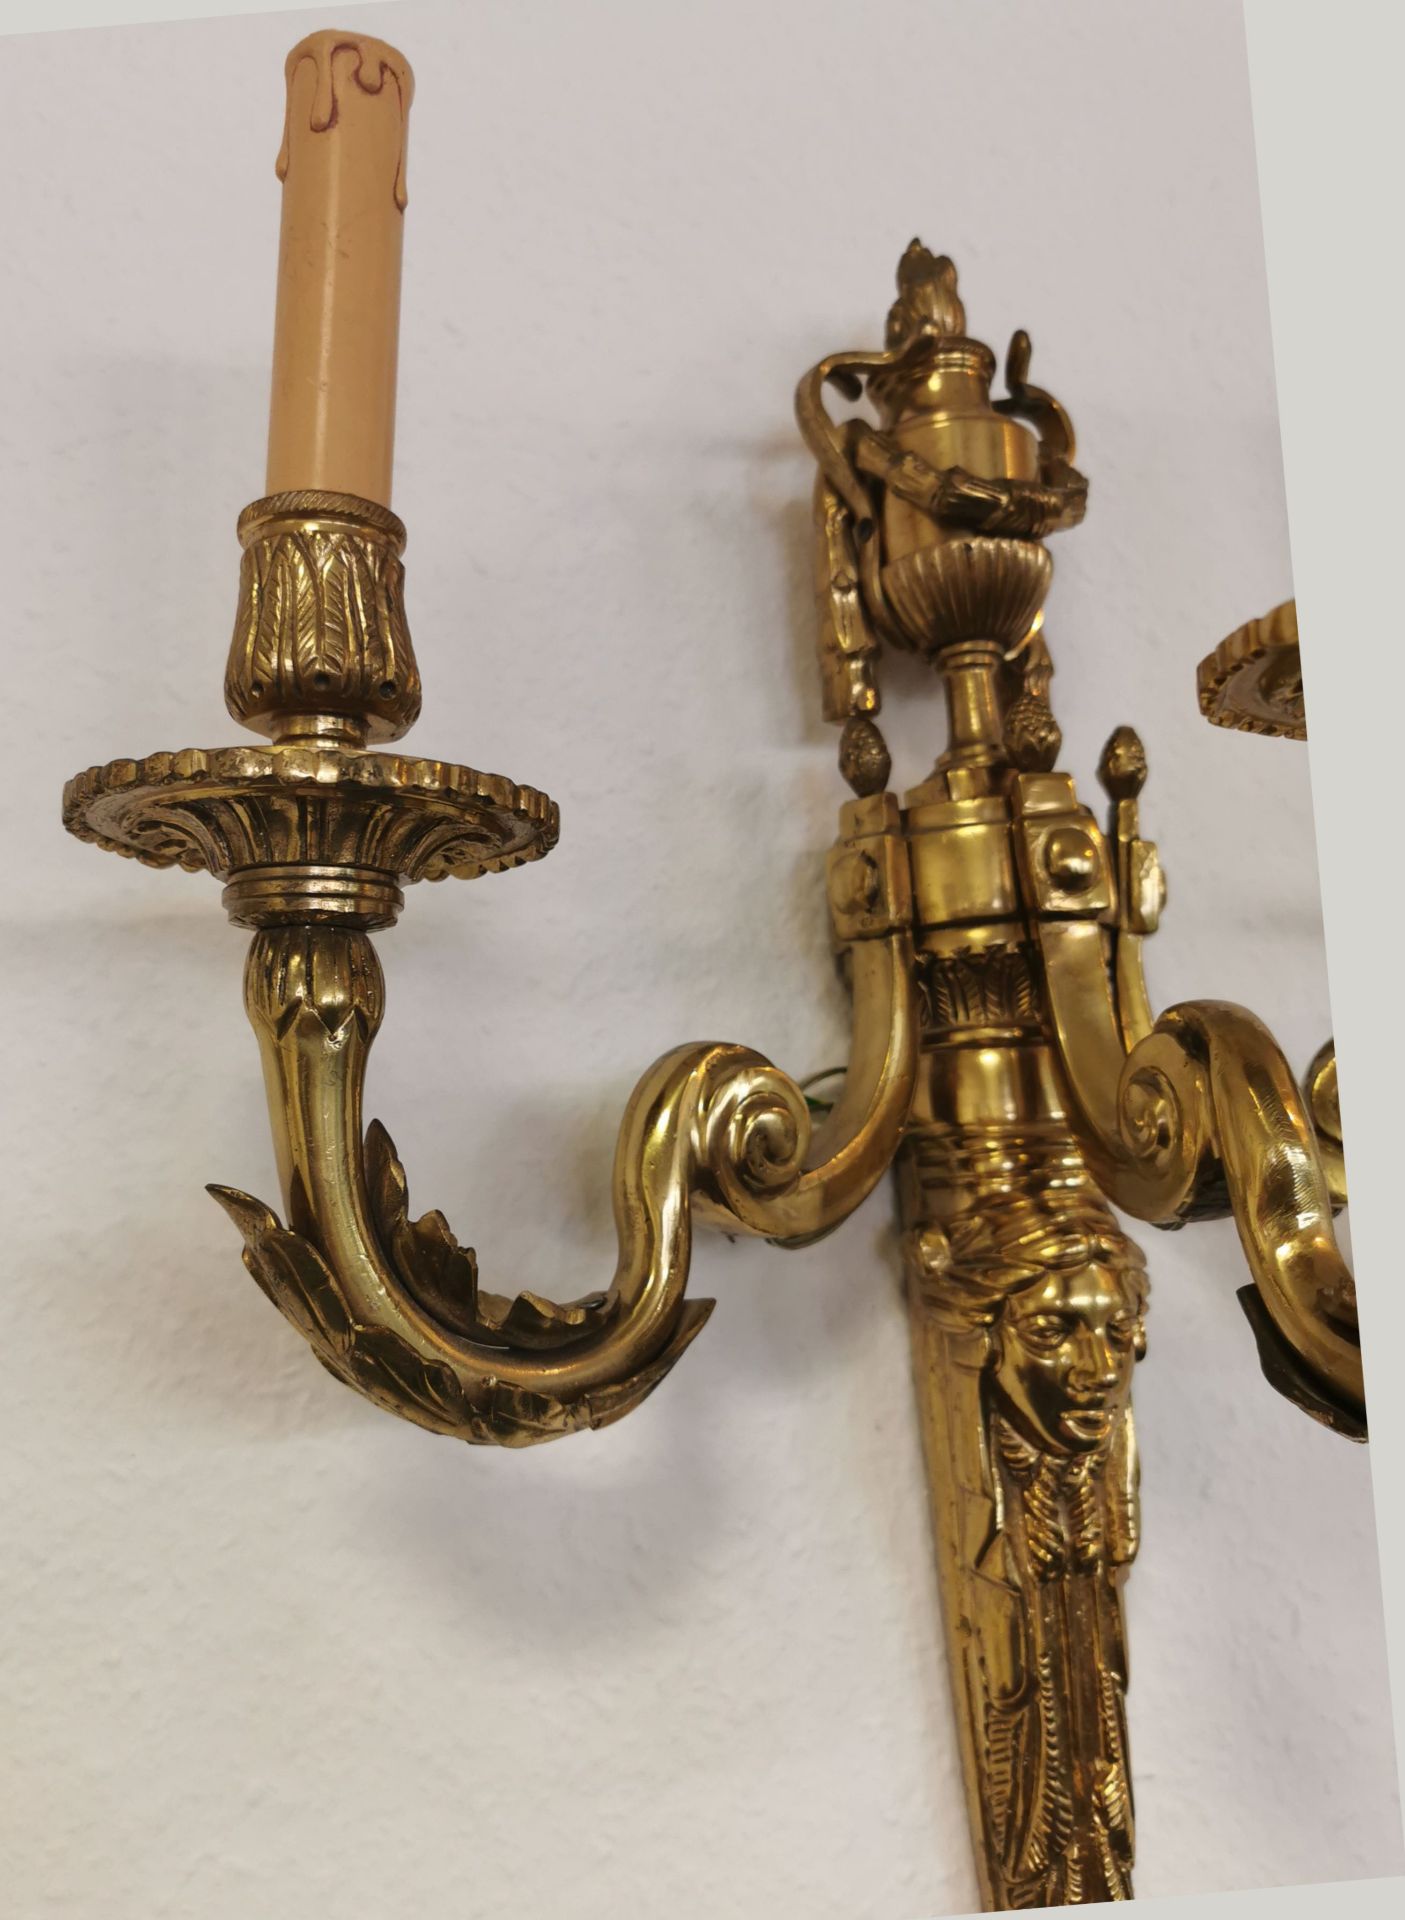 2 SPLENDID THREE-LIGHT SCONCES IN THE FORMAL LANGUAGE OF THE EMPIRE - Image 3 of 4